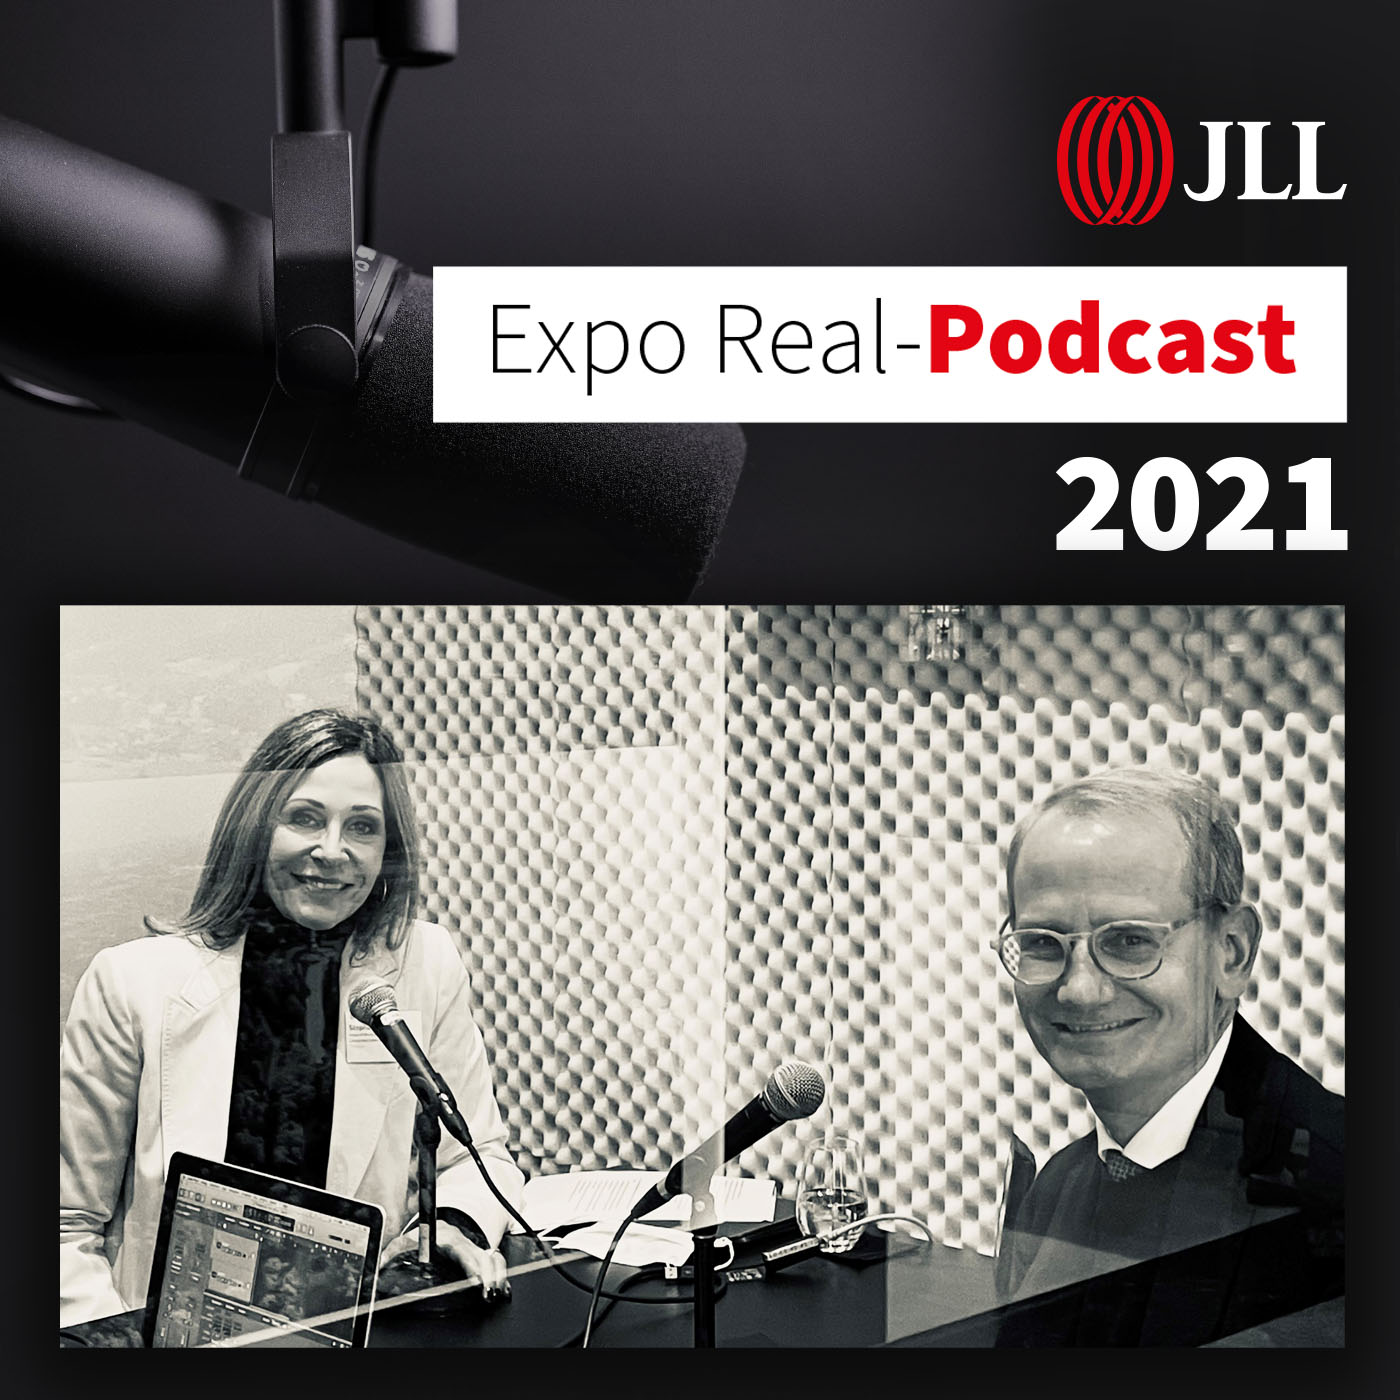 Artwork for podcast JLL Expo Real-Podcast 2021